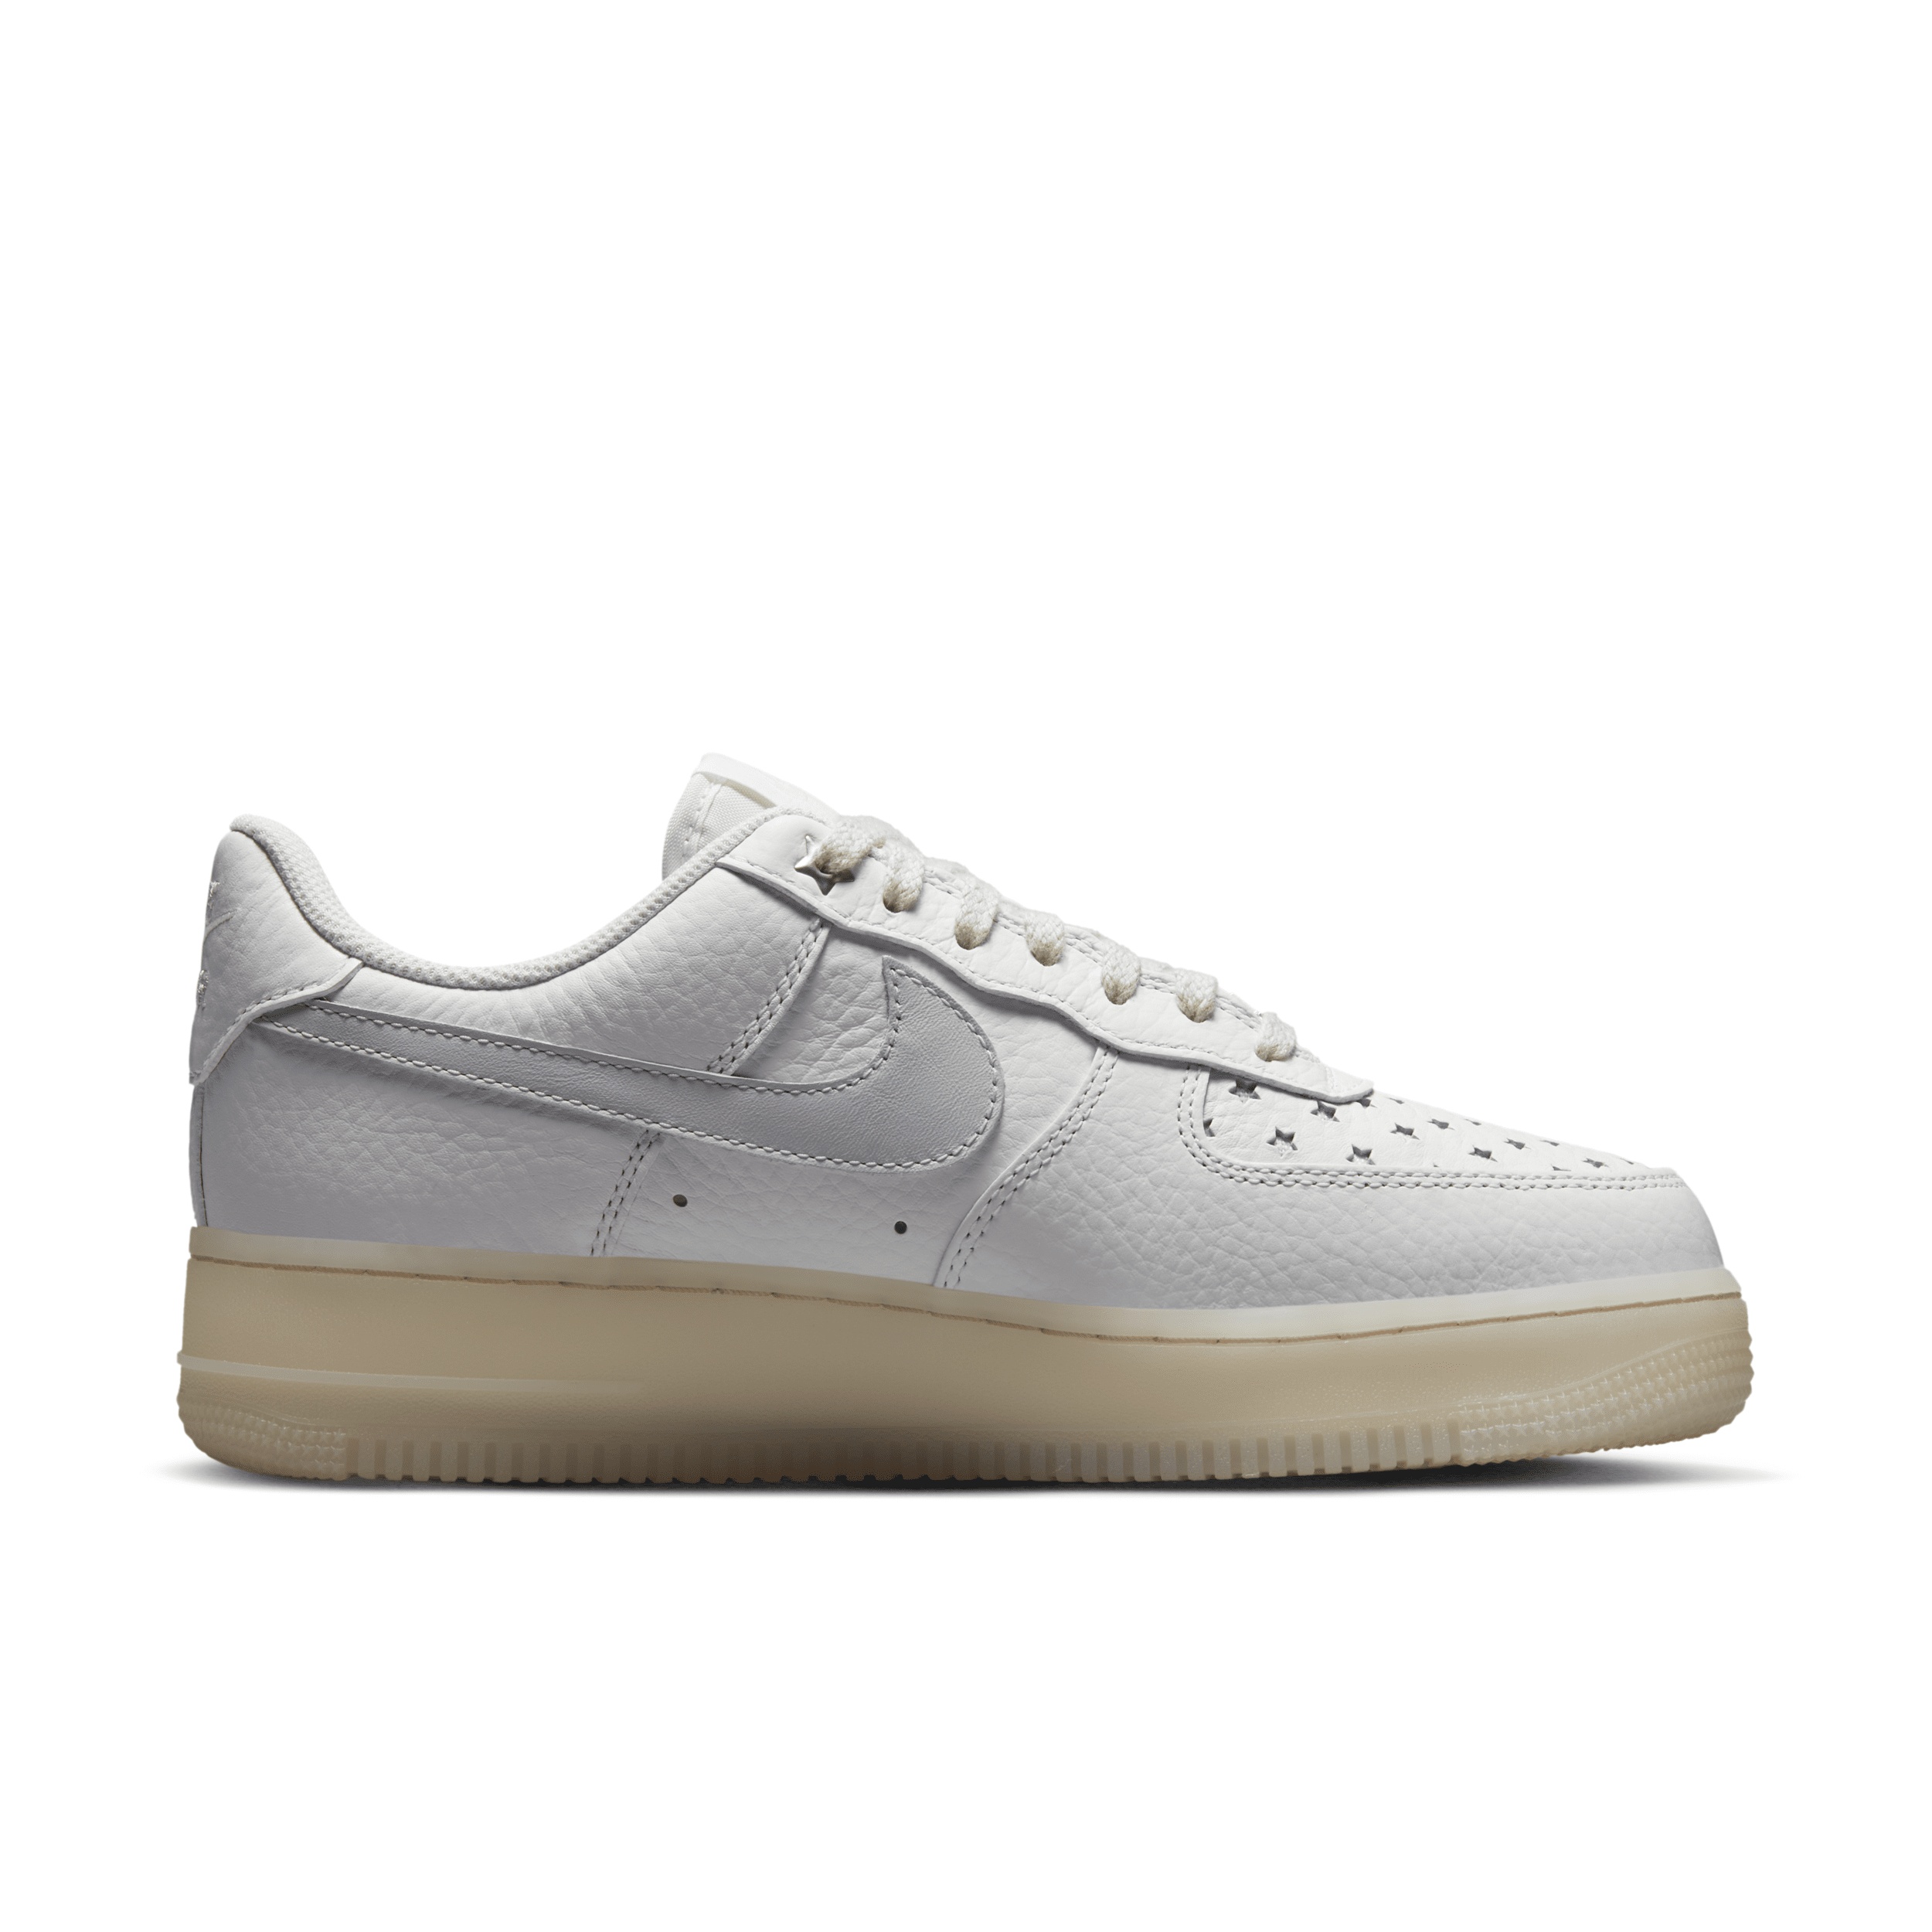 Nike Women's Air Force 1 '07 Shoes - 2